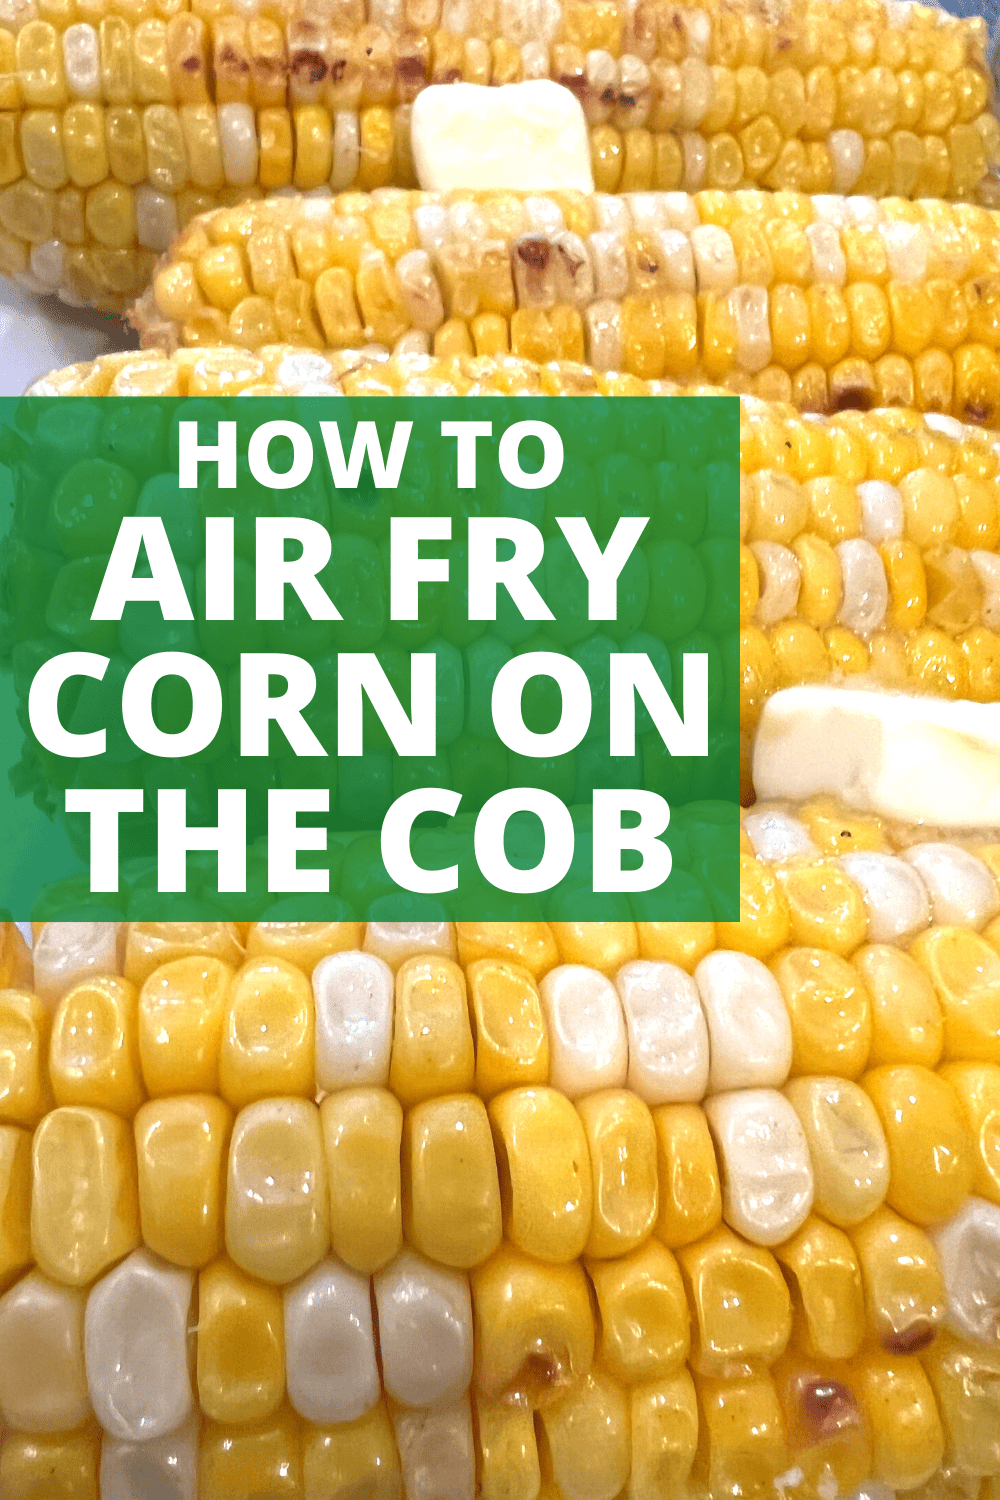 AIR FRYER CORN ON THE COB HOW TO AIR FRY CORN